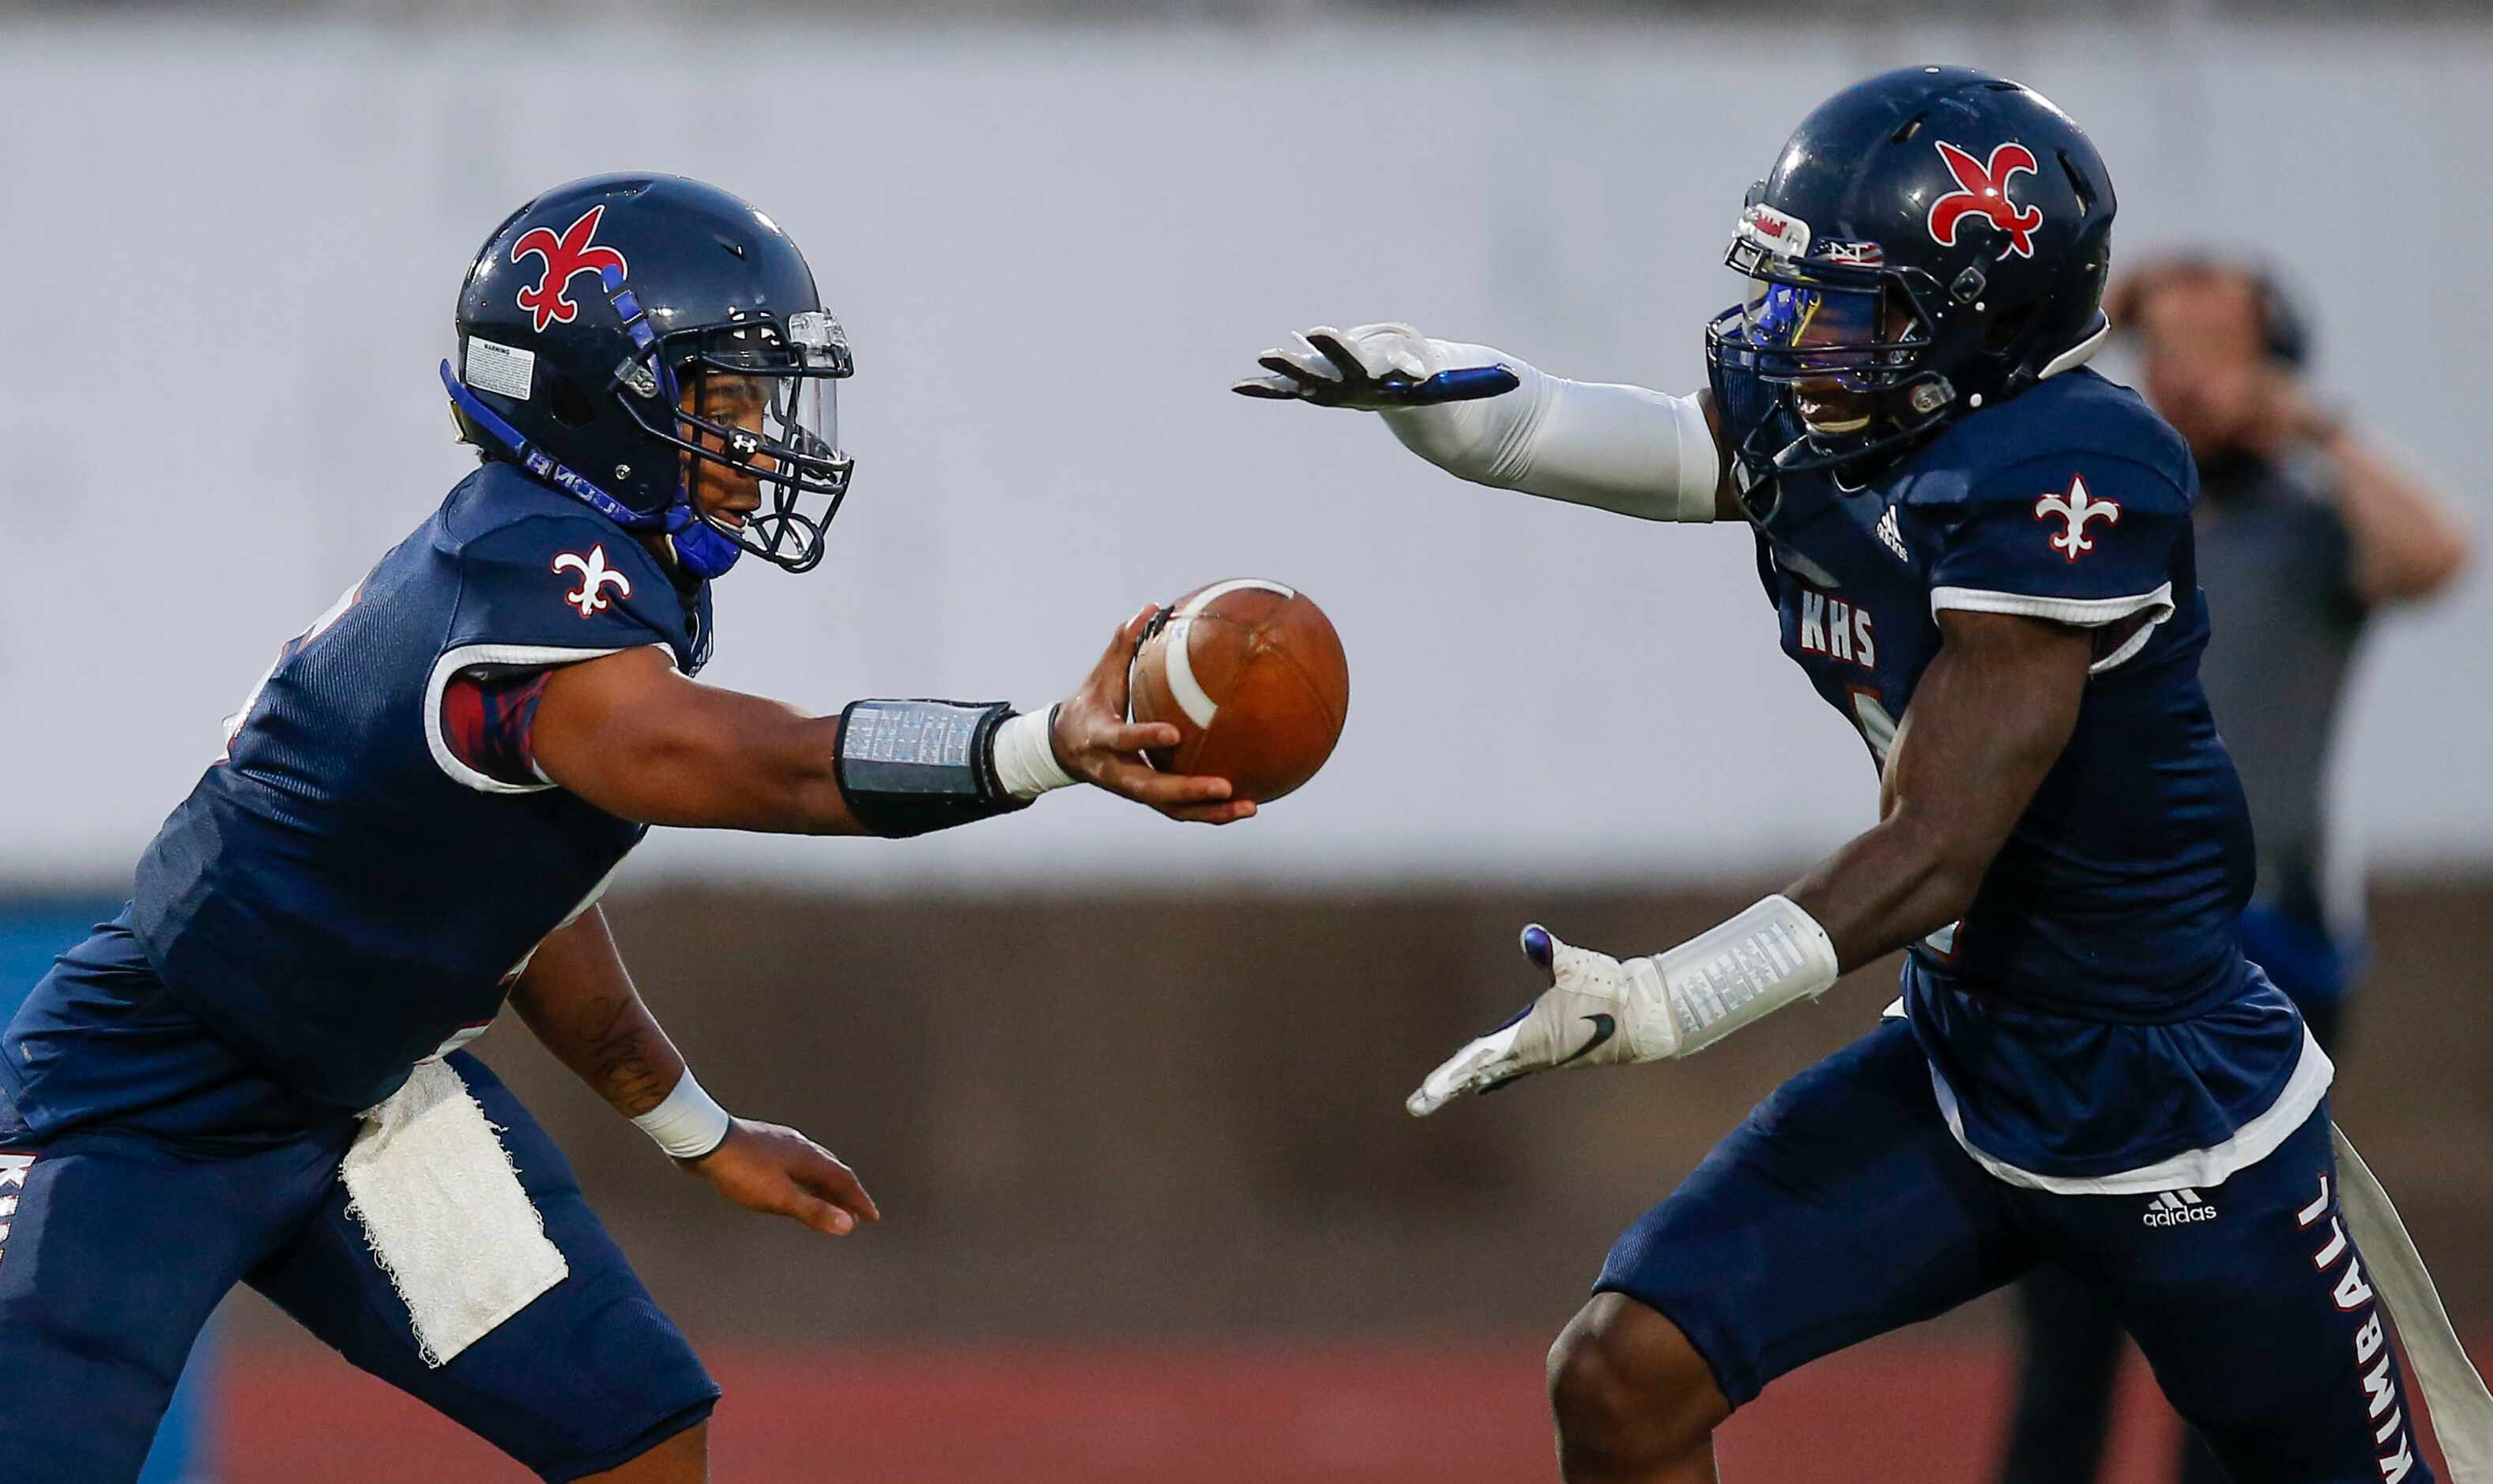 Kimball sophomore quarterback Jacarion Sauls, left, hands the ball off to senior running...